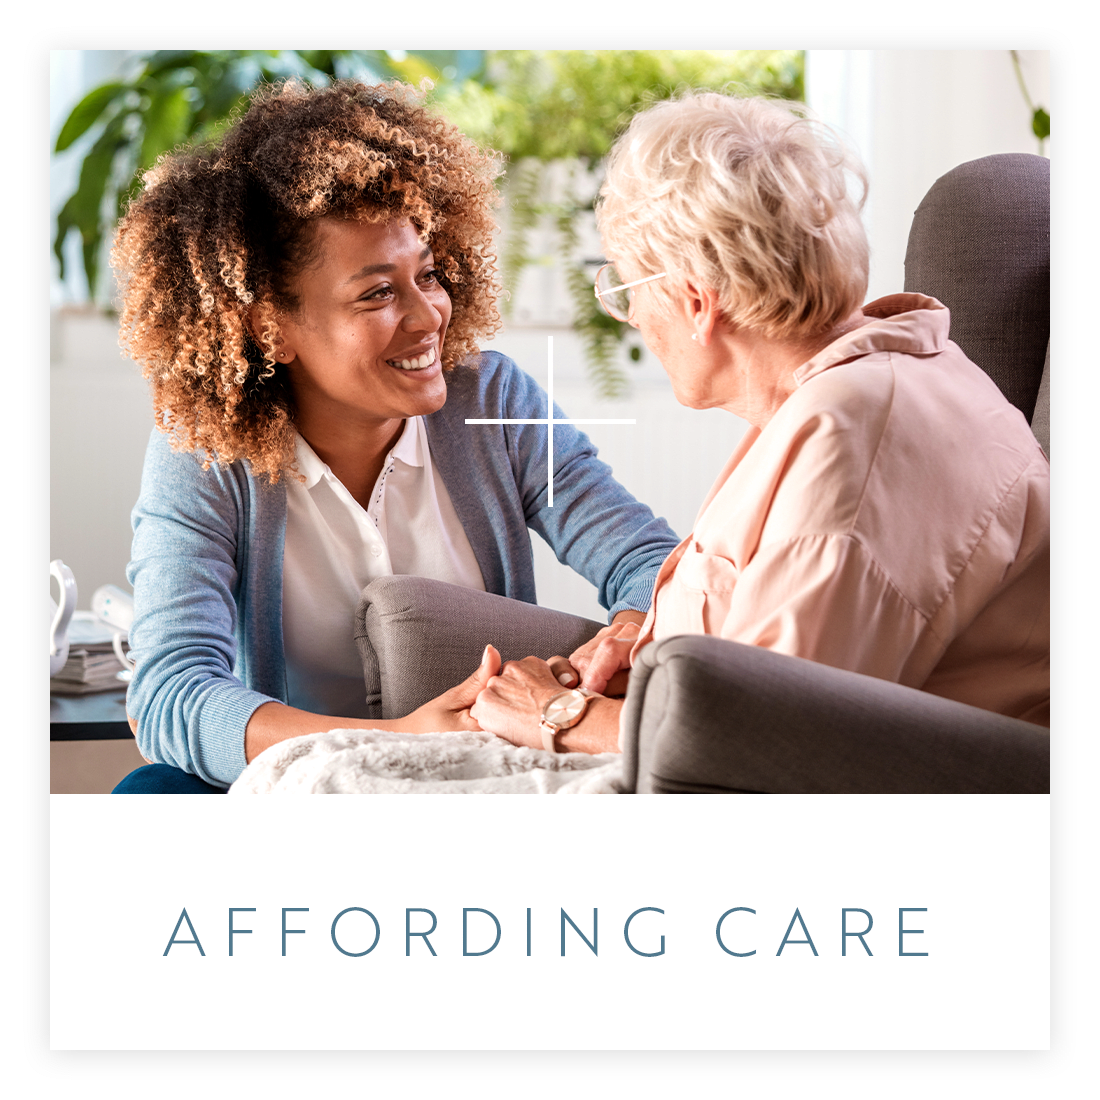 Learn about affording care at Chevy Chase House in Washington, District of Columbia